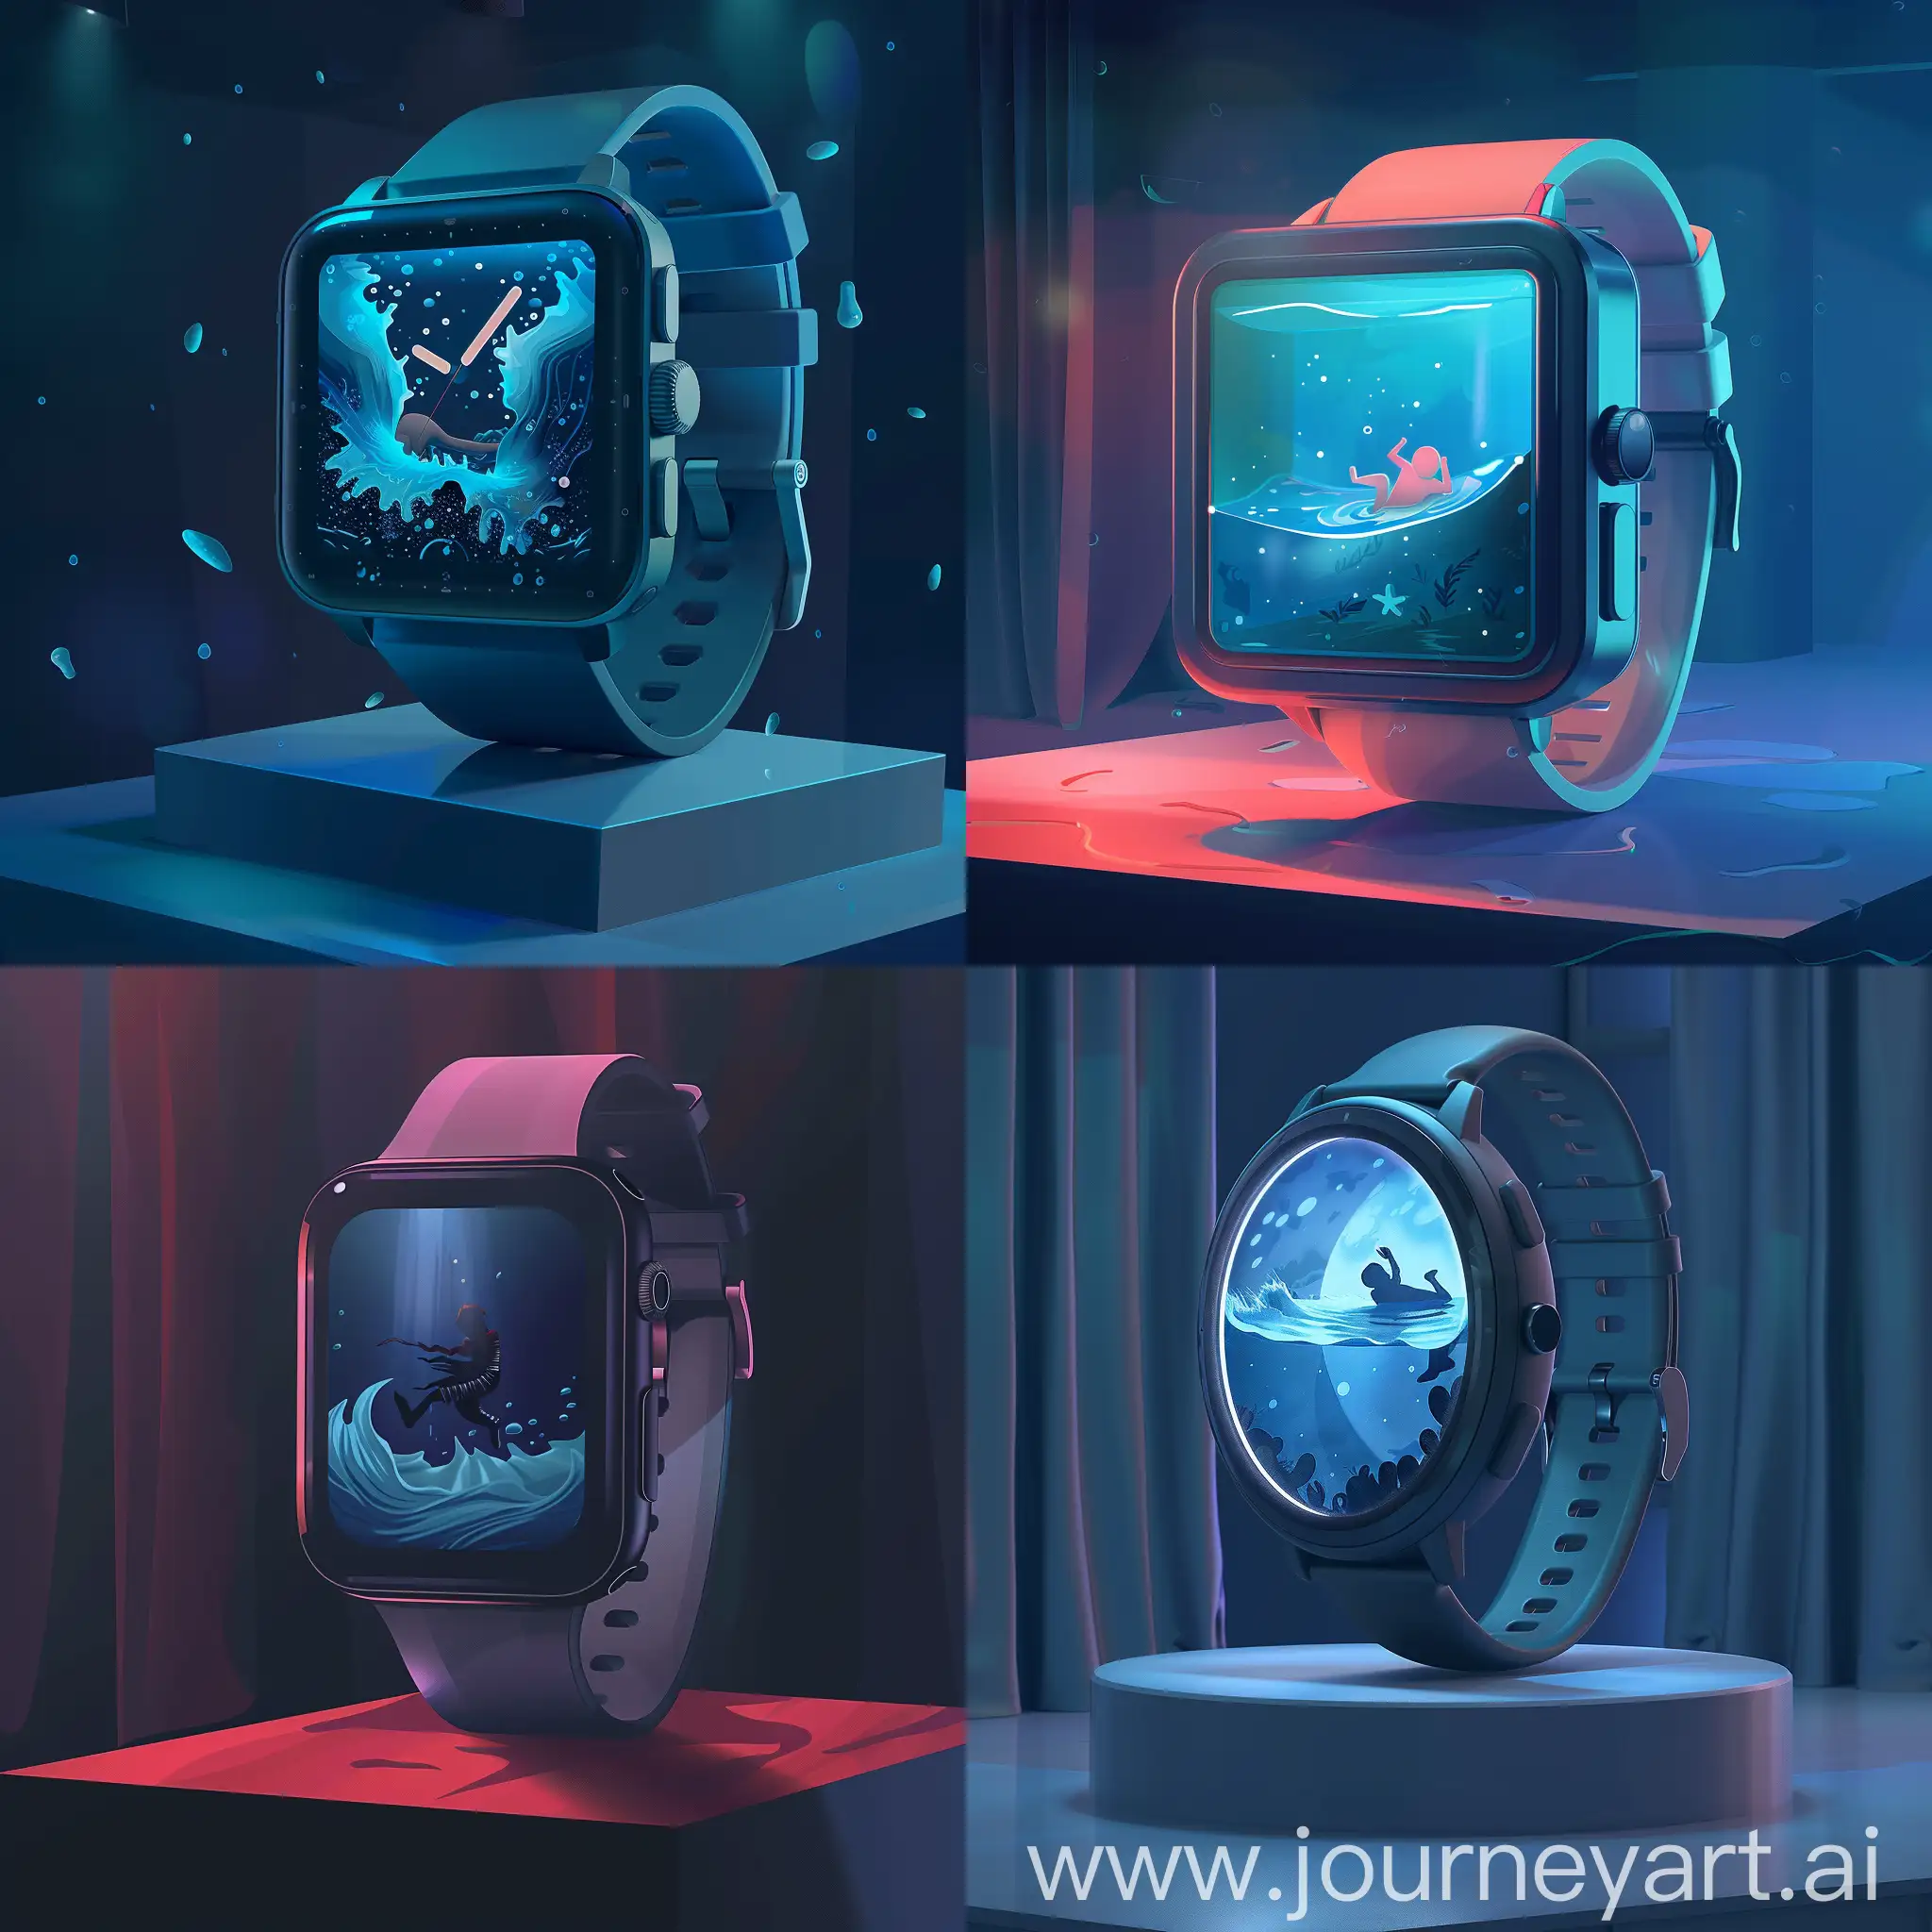 A smart watch with a sea inside its screen, and inside the sea a person is drowning, and the entire watch is placed on a stage, and the background is simple. I want it to be simple so that I can use it in the design, and make the image as realistic as possible, so that even the person who is drowning is realistic.